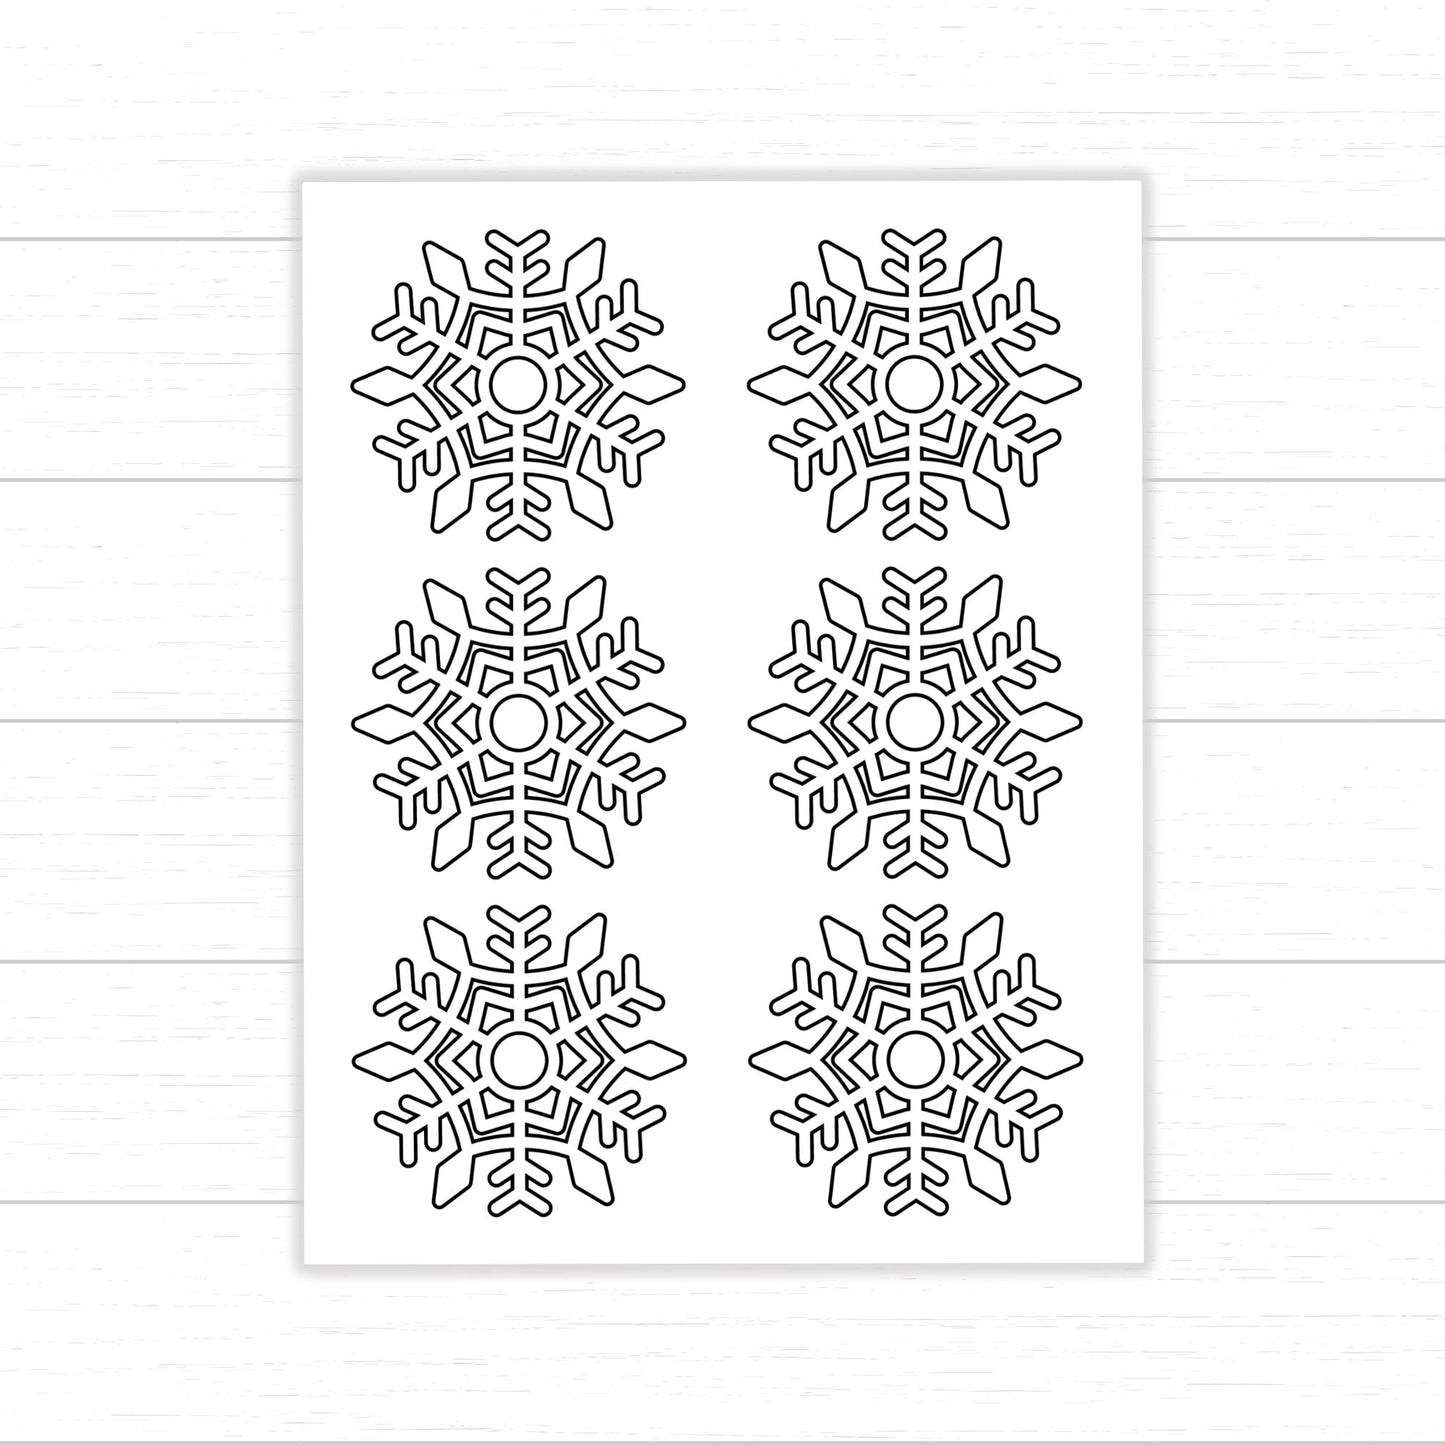 Snowflake Coloring Pages, Snowflakes to Color, Winter Snowflakes, Winter Activities for Kids, Printable Snowflakes, Snowflake Crafts